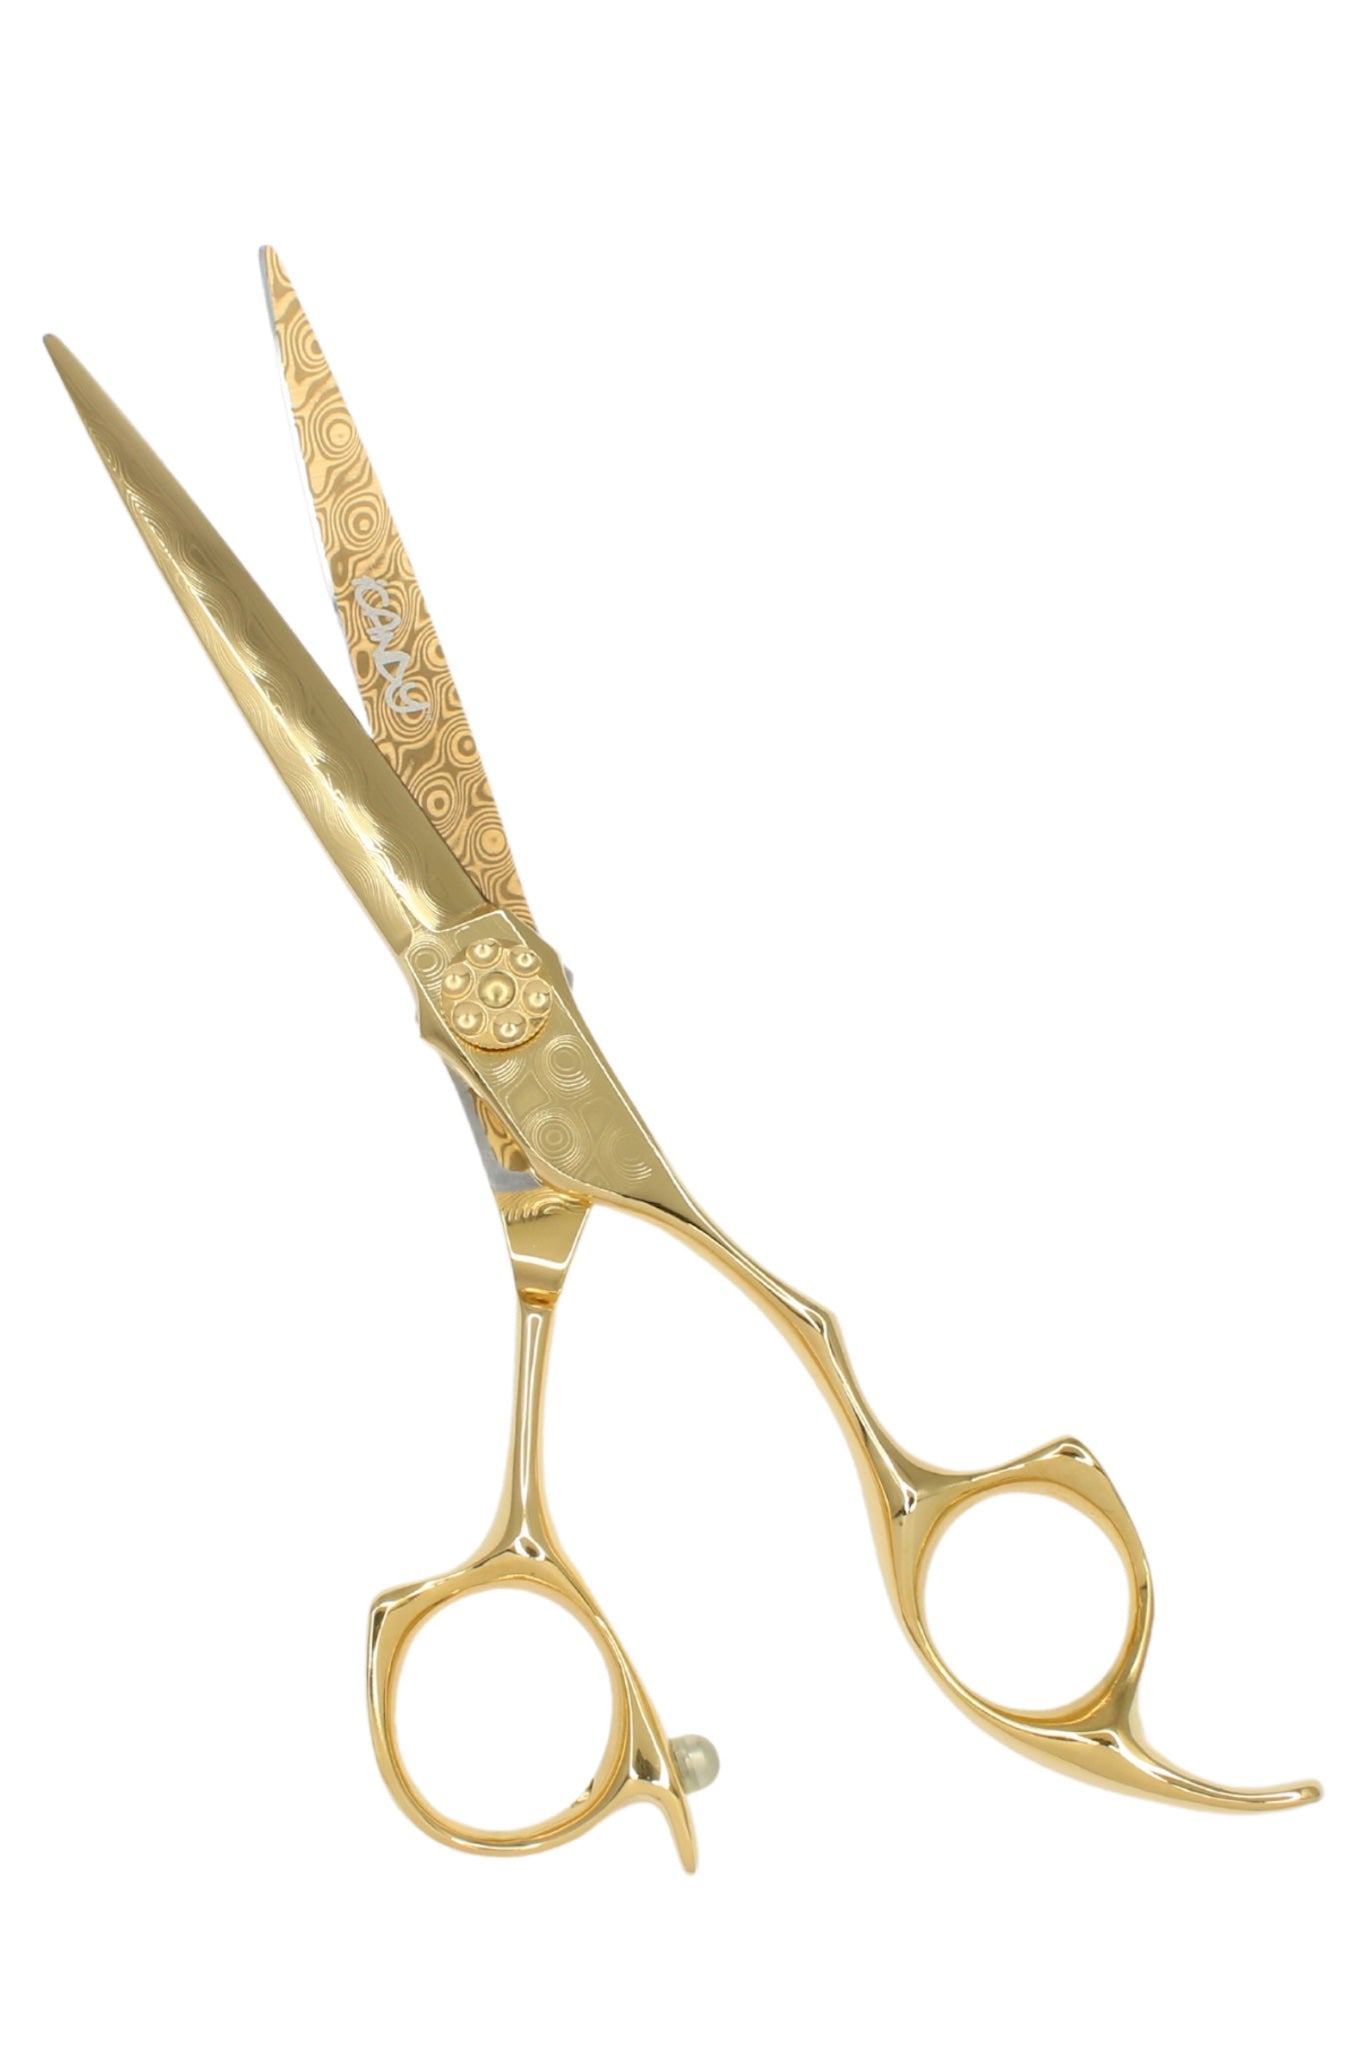 iCandy DAMASCUS ALL STAR Yellow Gold Scissor 6.5" Pic2